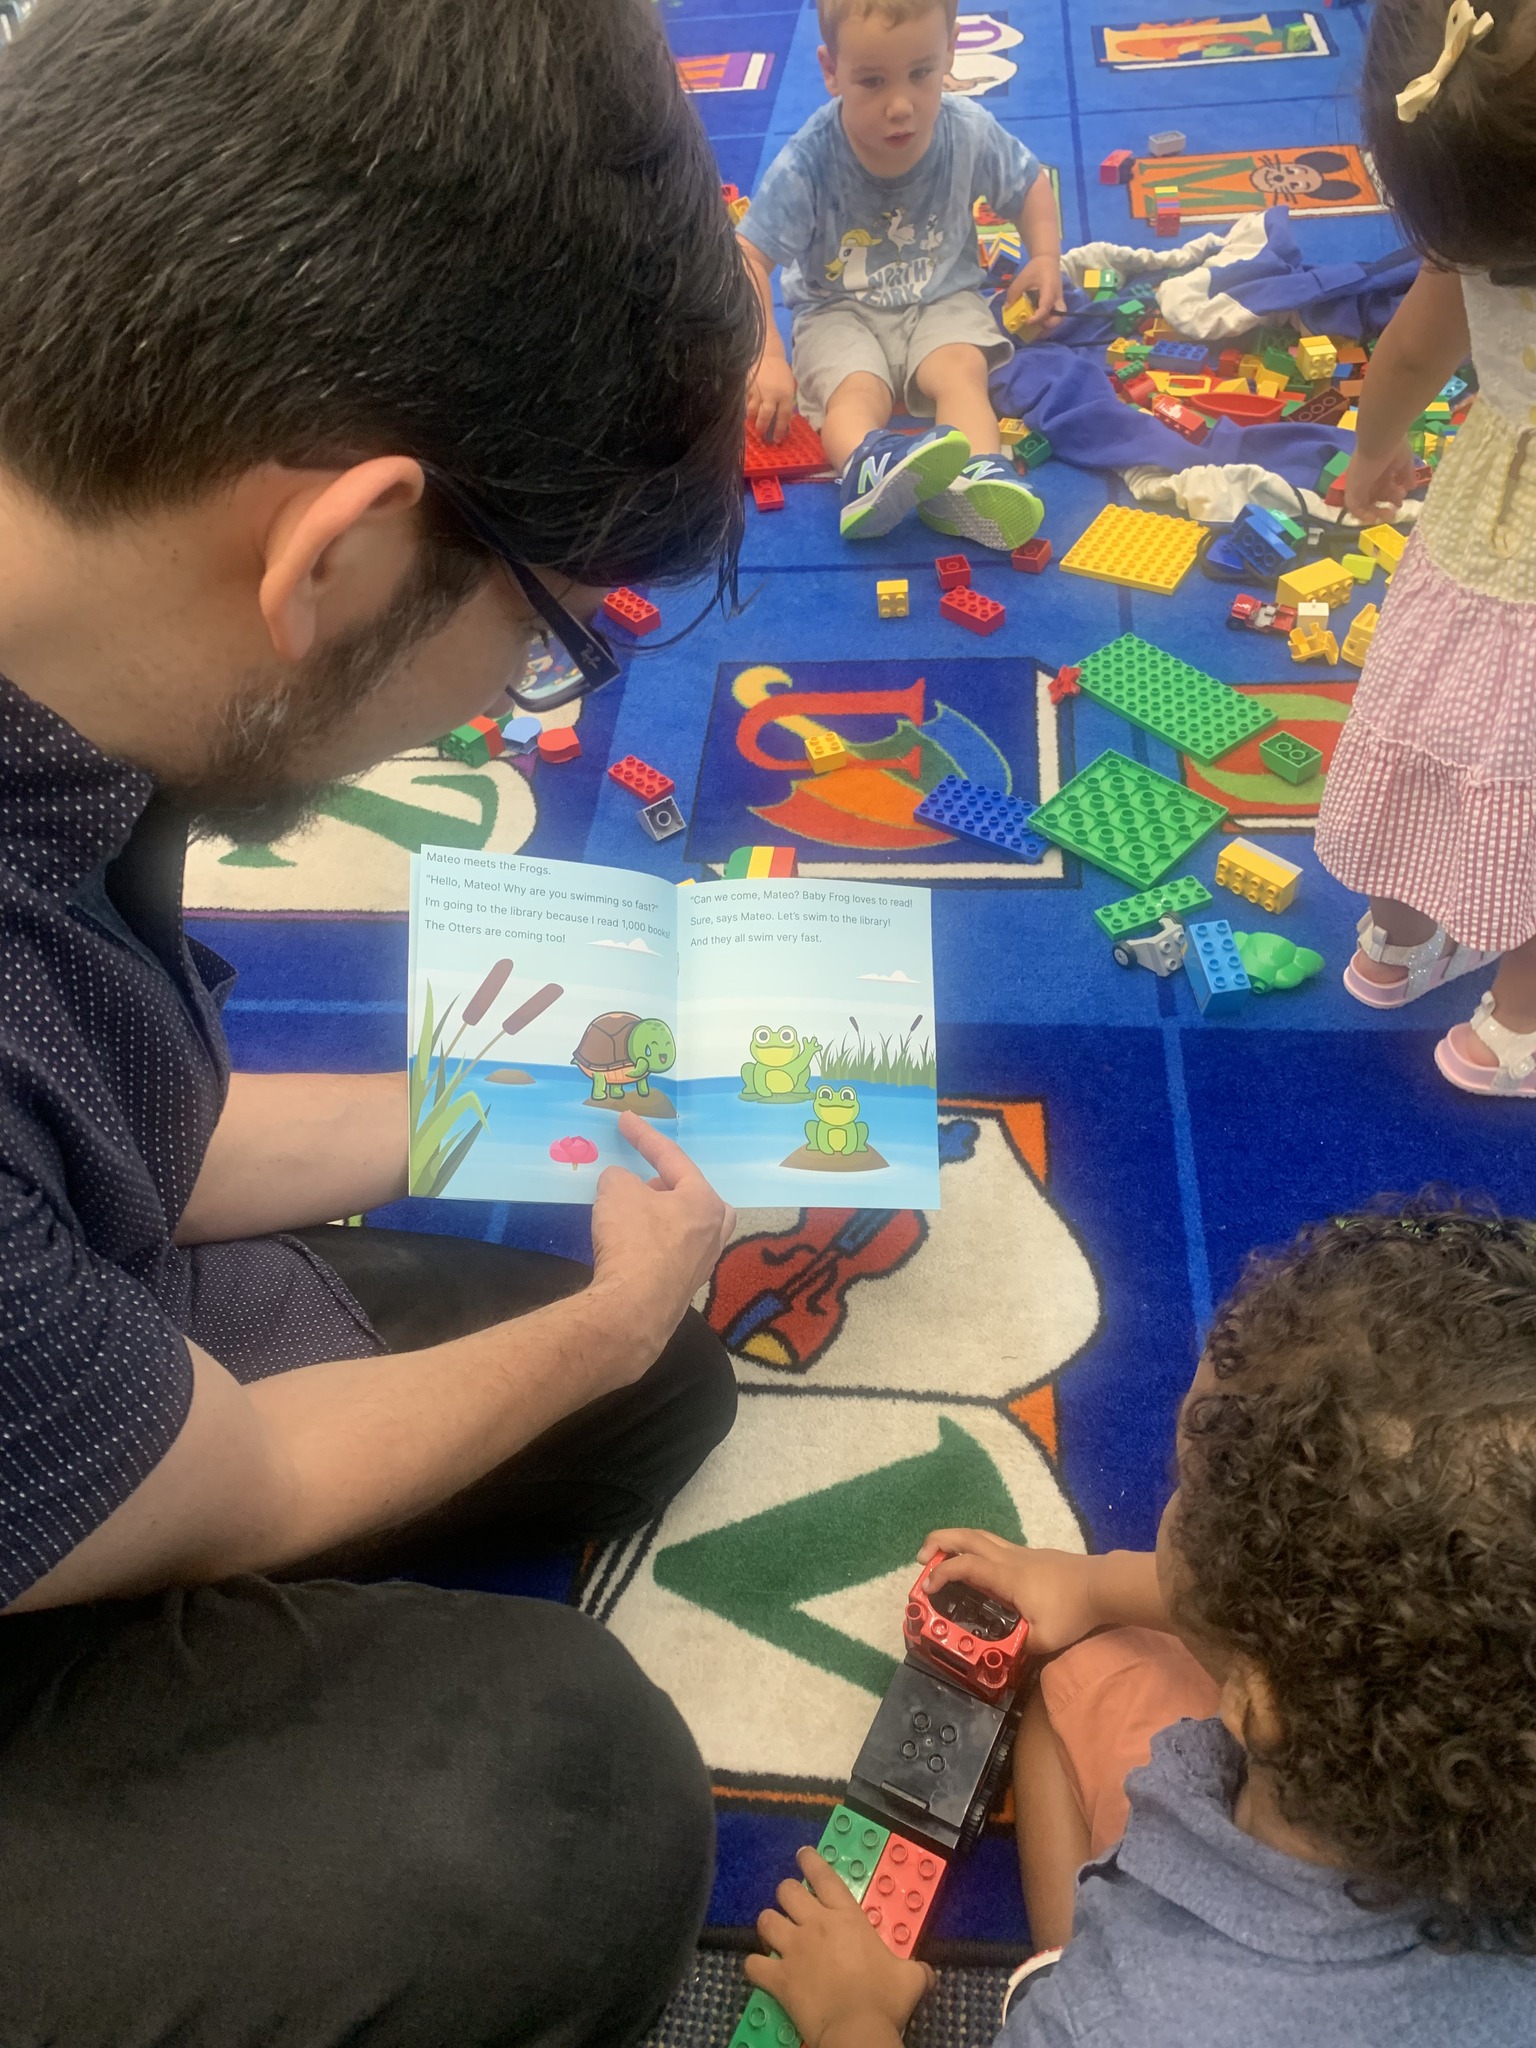 Mateo and his father read together at the Will Library